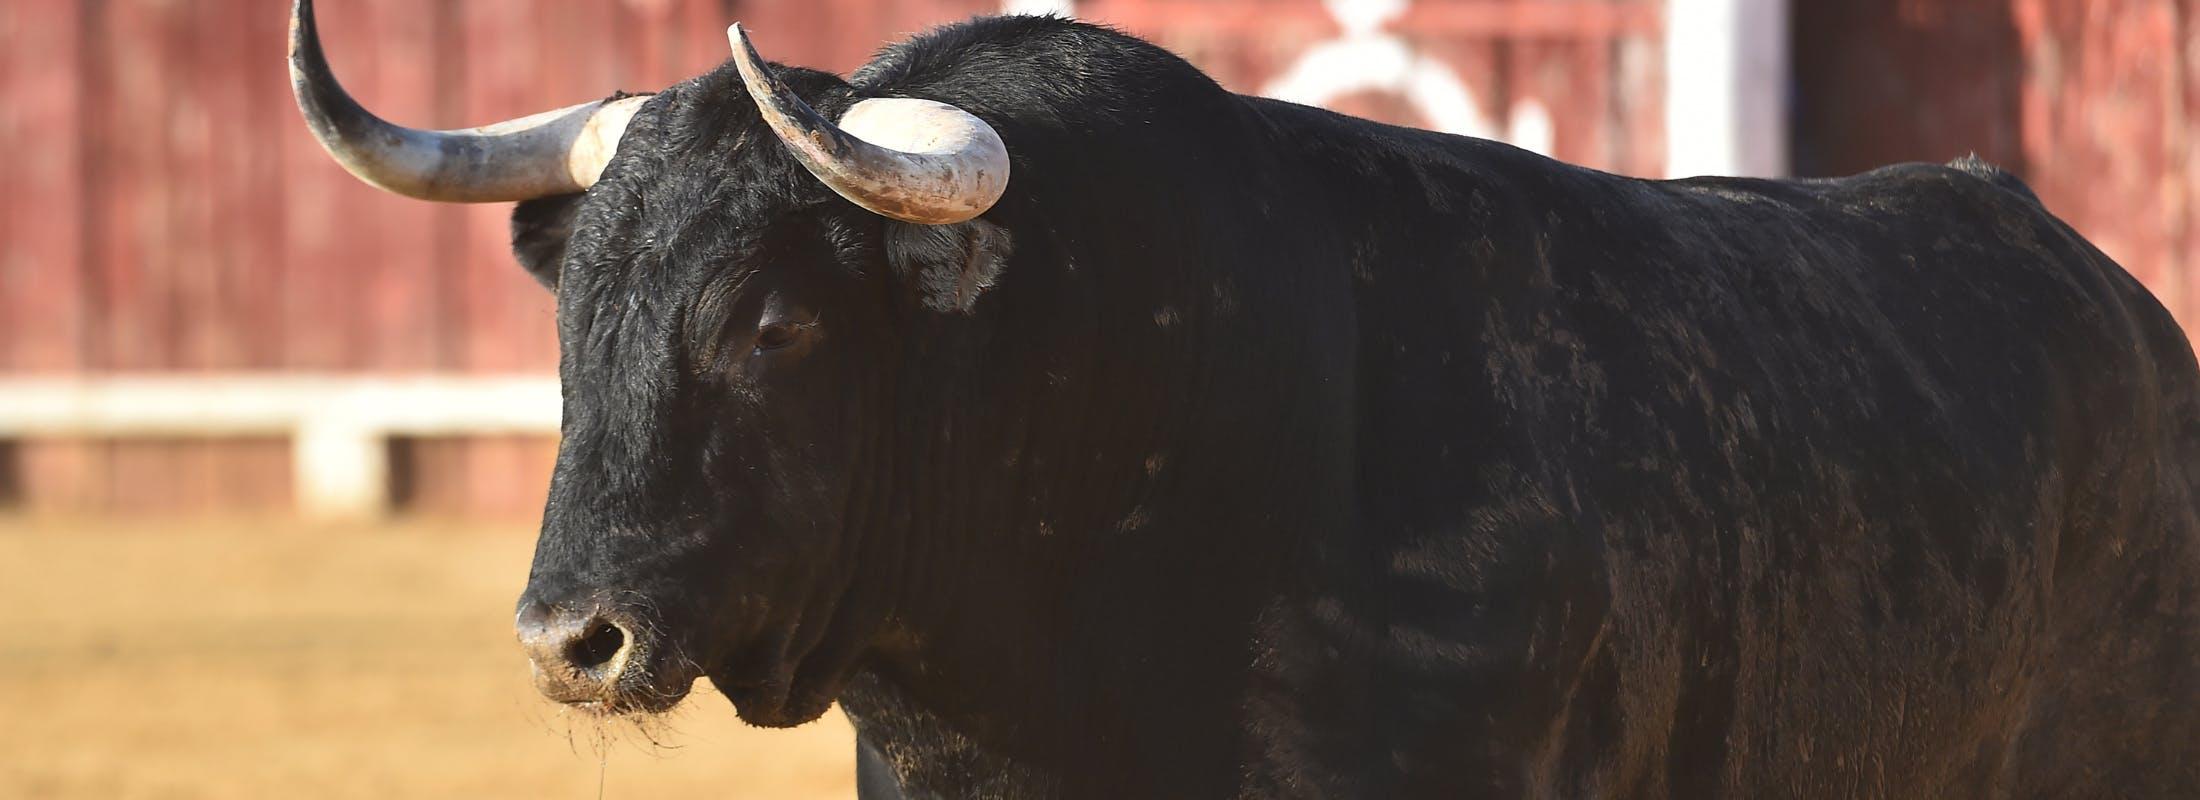 Excess Spread — Take the bull by the horns, the risk nobody wants?